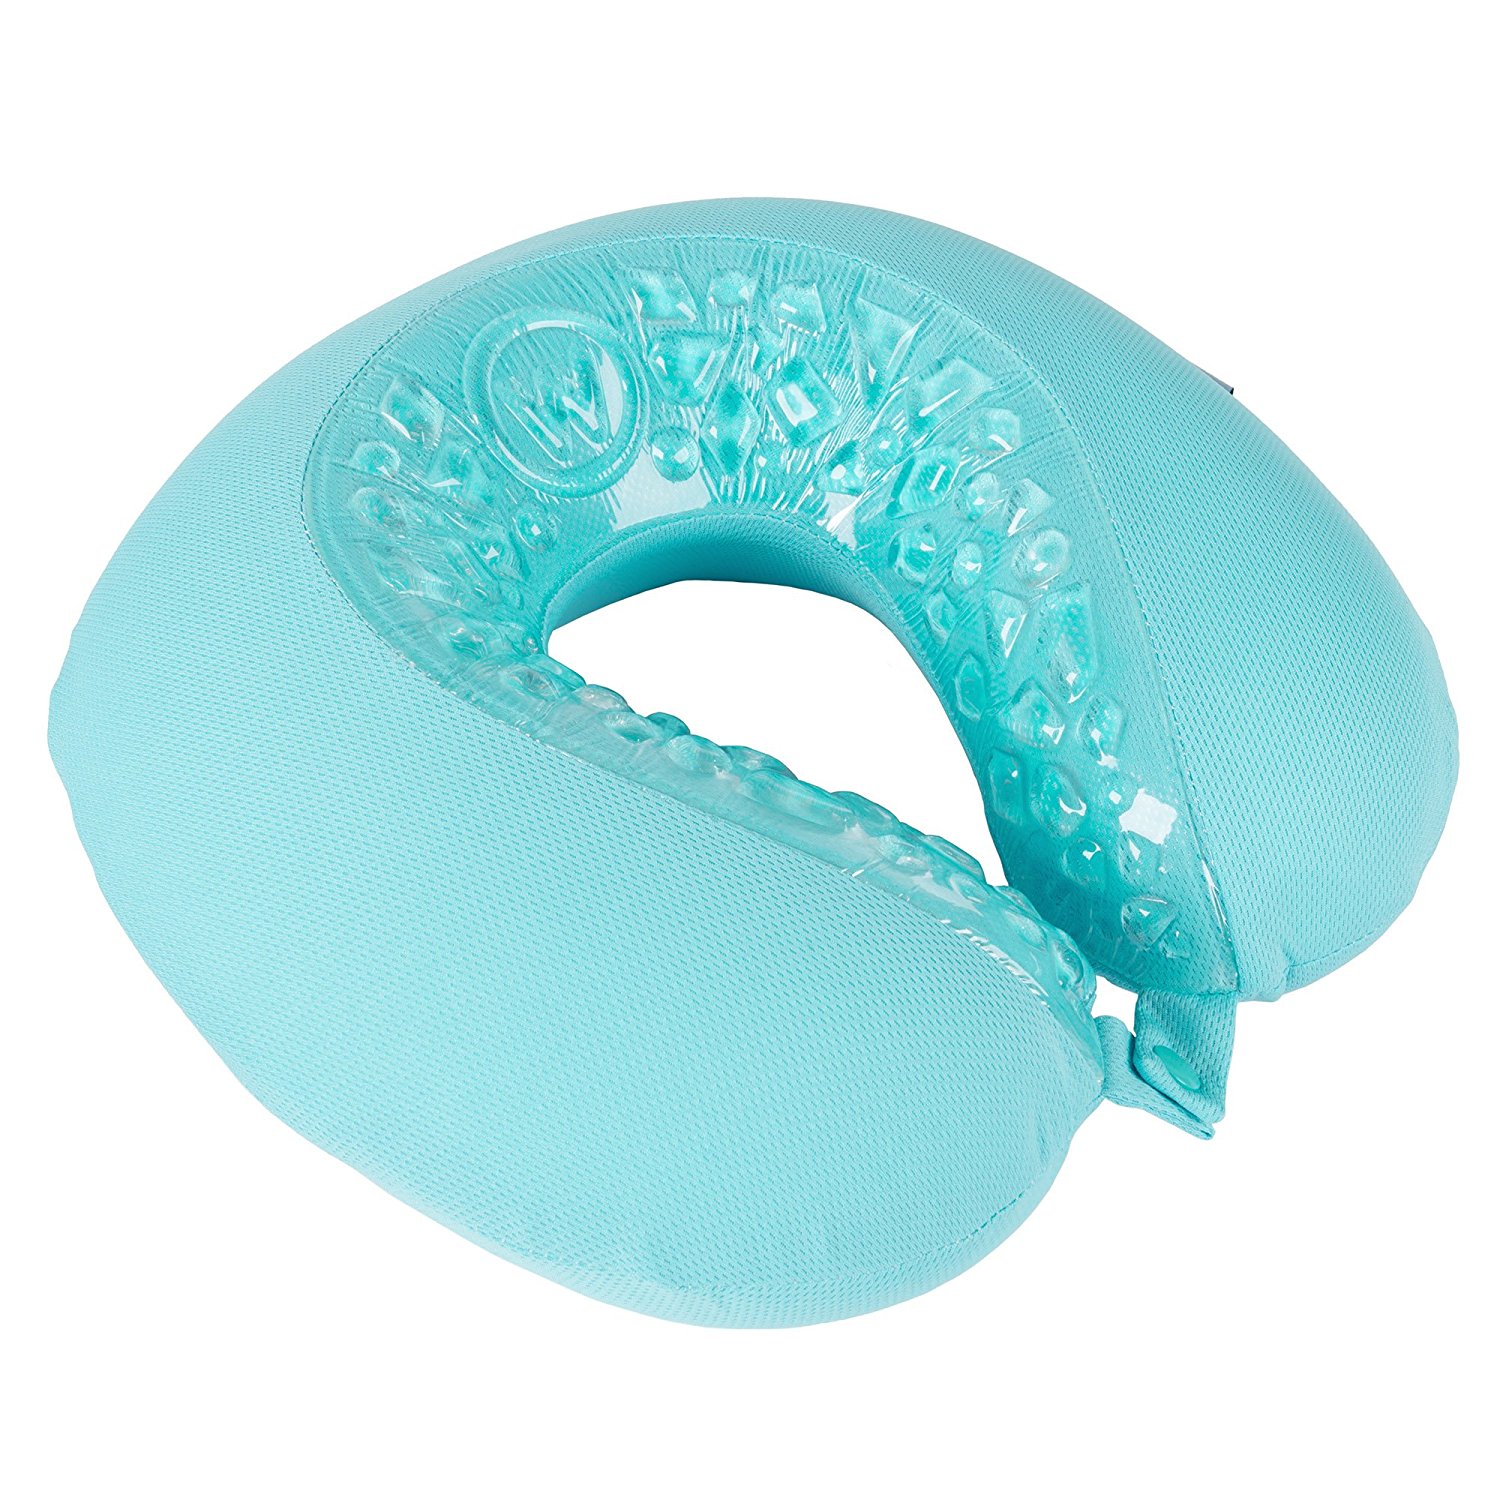 Buy Best Compact Travel Pillow Online At Lowest Prices